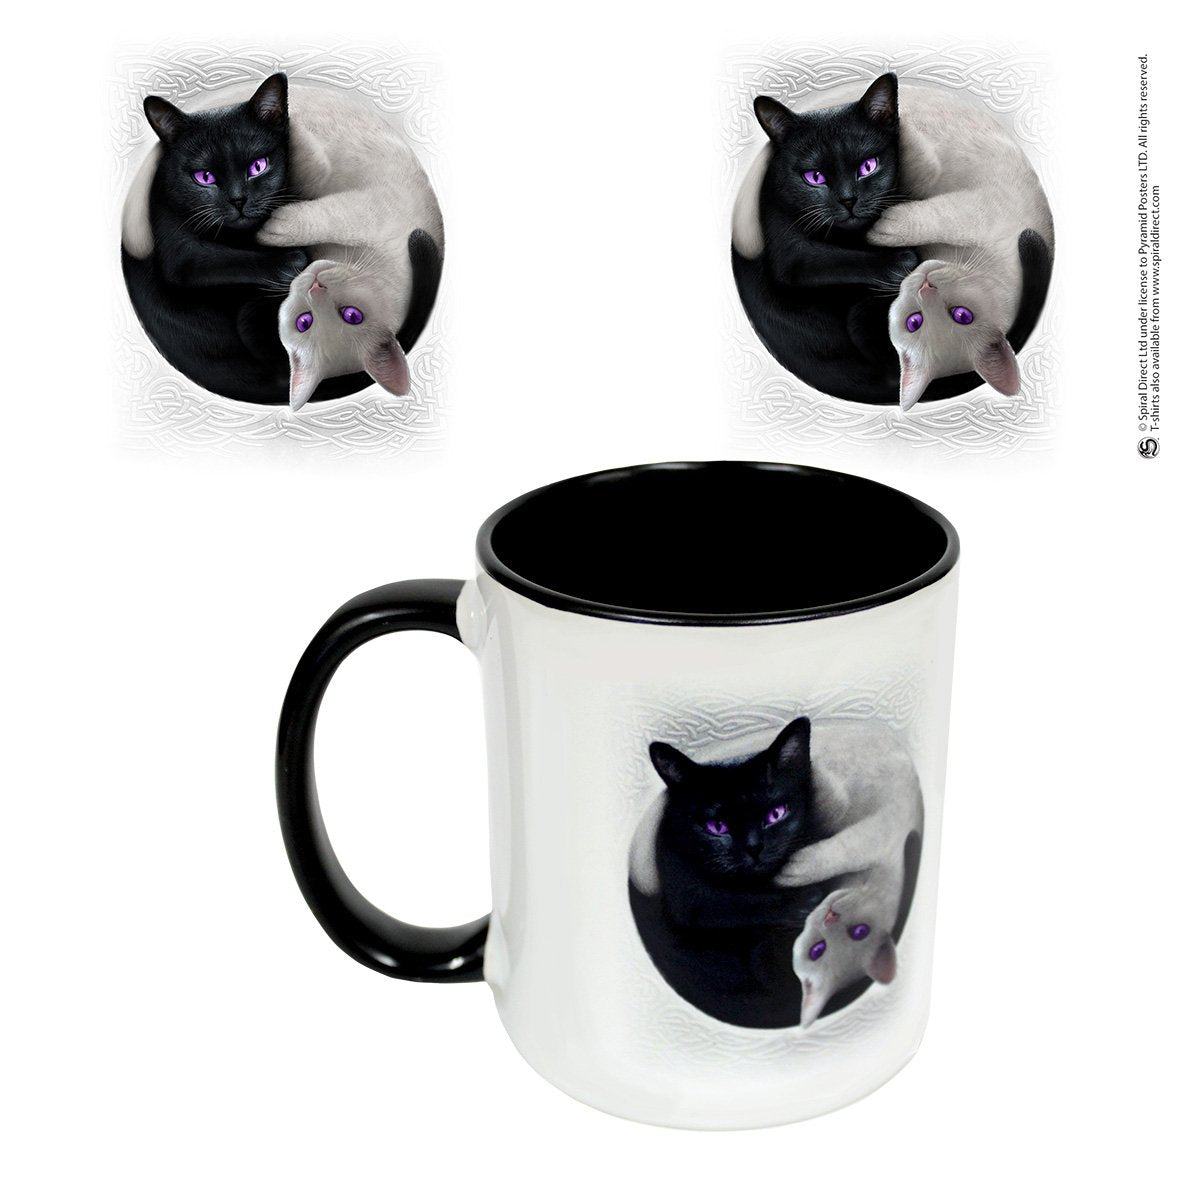 gothic ceramic cup with yin yang cats design